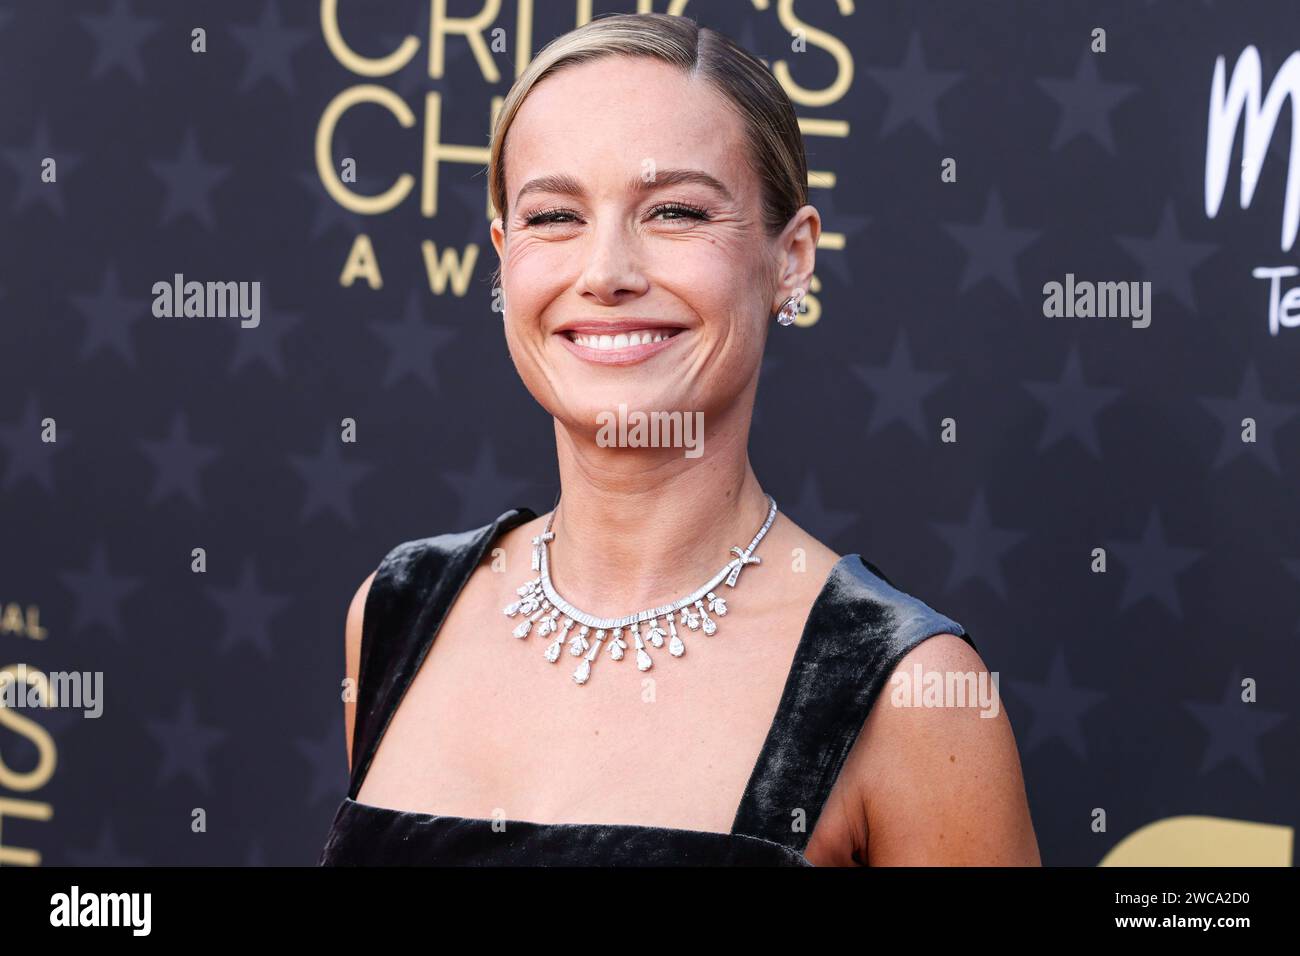 SANTA MONICA, LOS ANGELES, CALIFORNIA, USA - JANUARY 14: Brie Larson wearing a custom Prada gown and Neil Lane Couture jewelry arrives at the 29th Annual Critics' Choice Awards held at The Barker Hangar on January 14, 2024 in Santa Monica, Los Angeles, California, United States. (Photo by Xavier Collin/Image Press Agency) Stock Photo